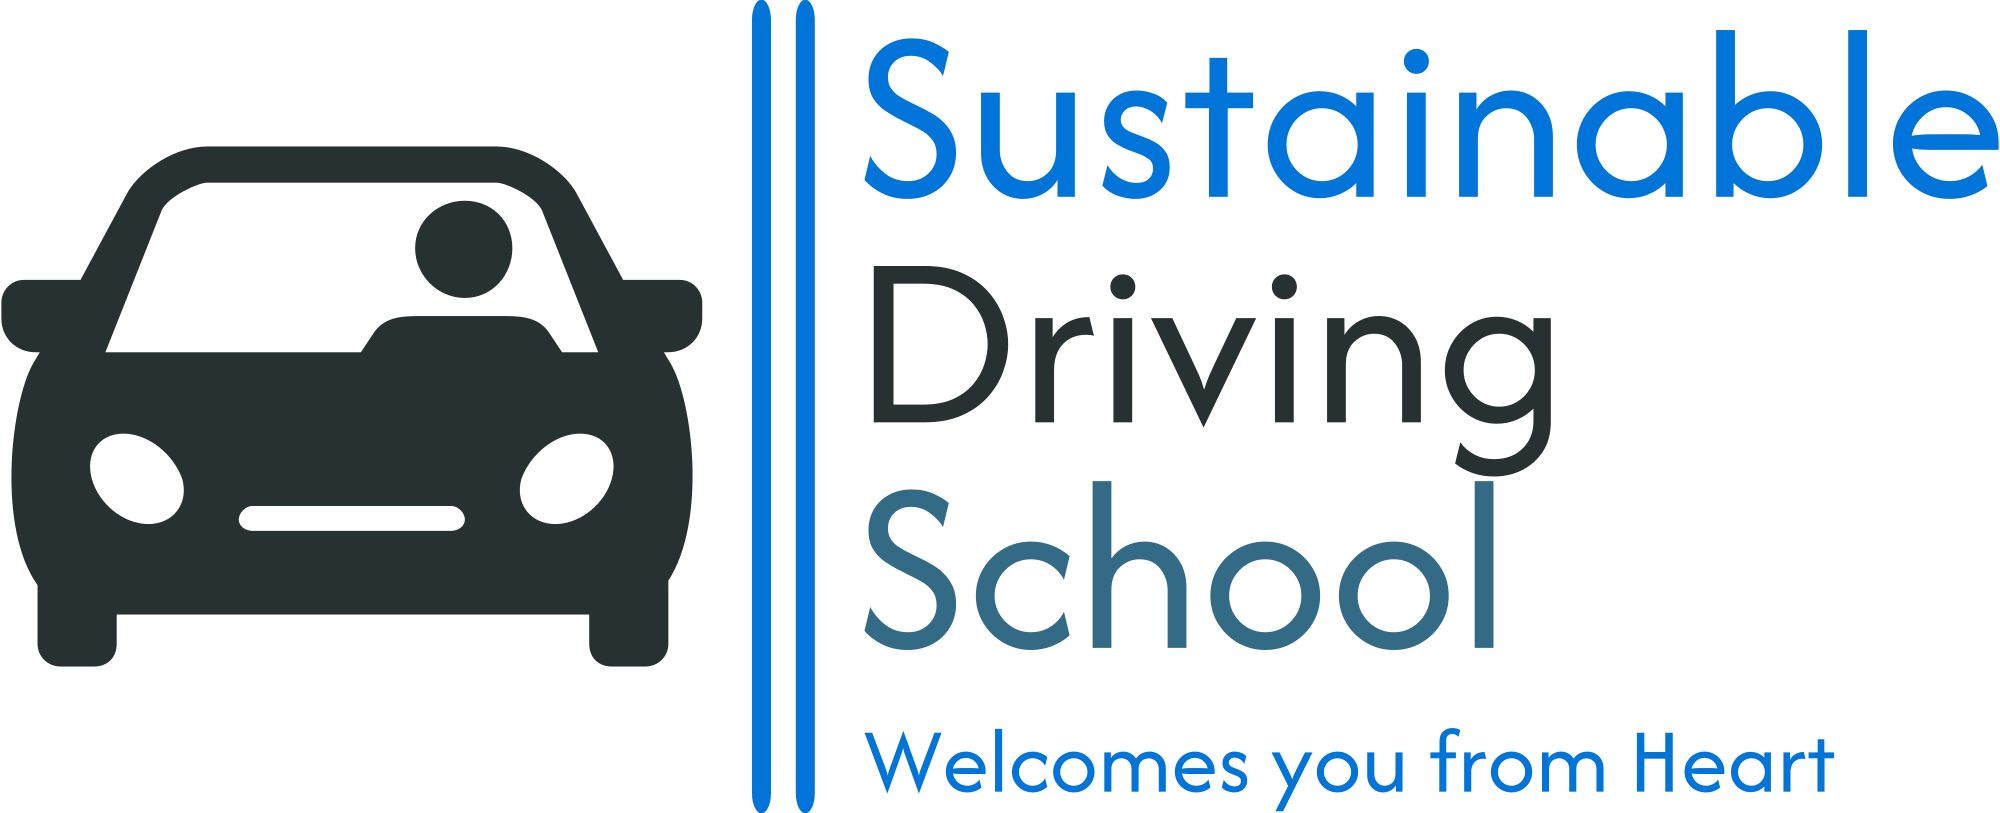 sustainable driving school high resolution logo transparent